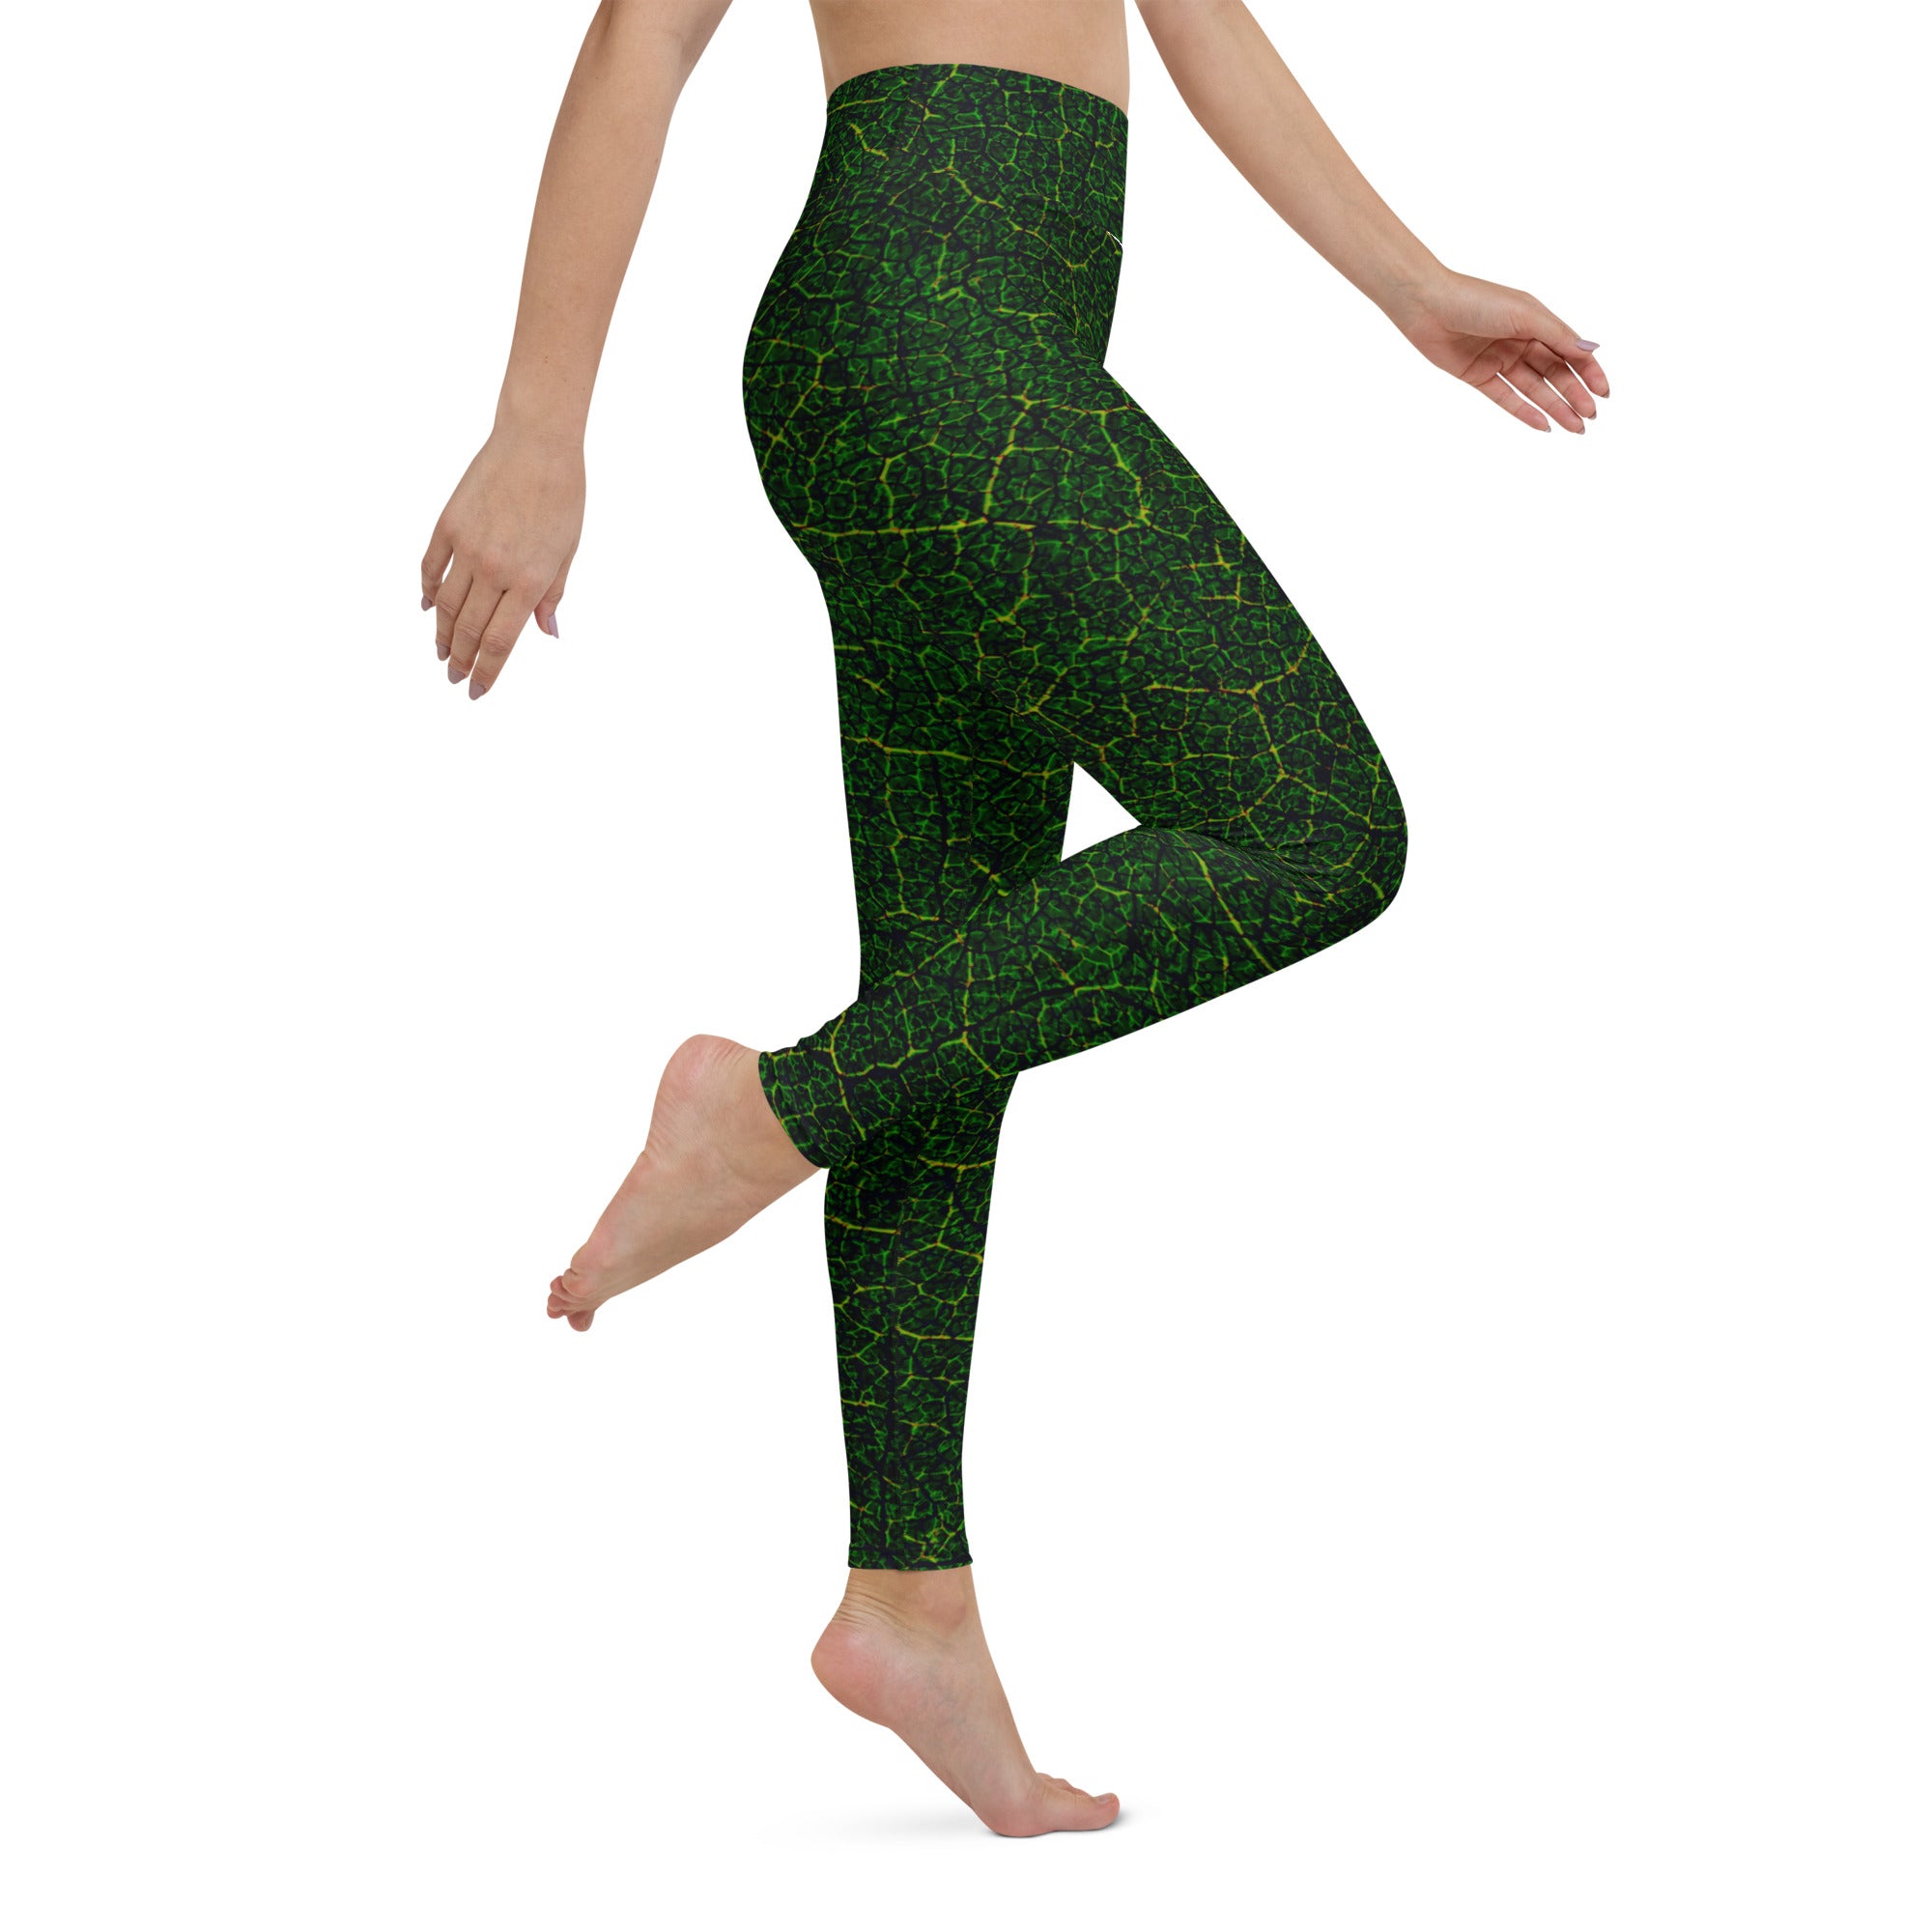 Outdoor yoga session in Verdant Vines Yoga Leggings, merging practice with the lush beauty of a garden setting.